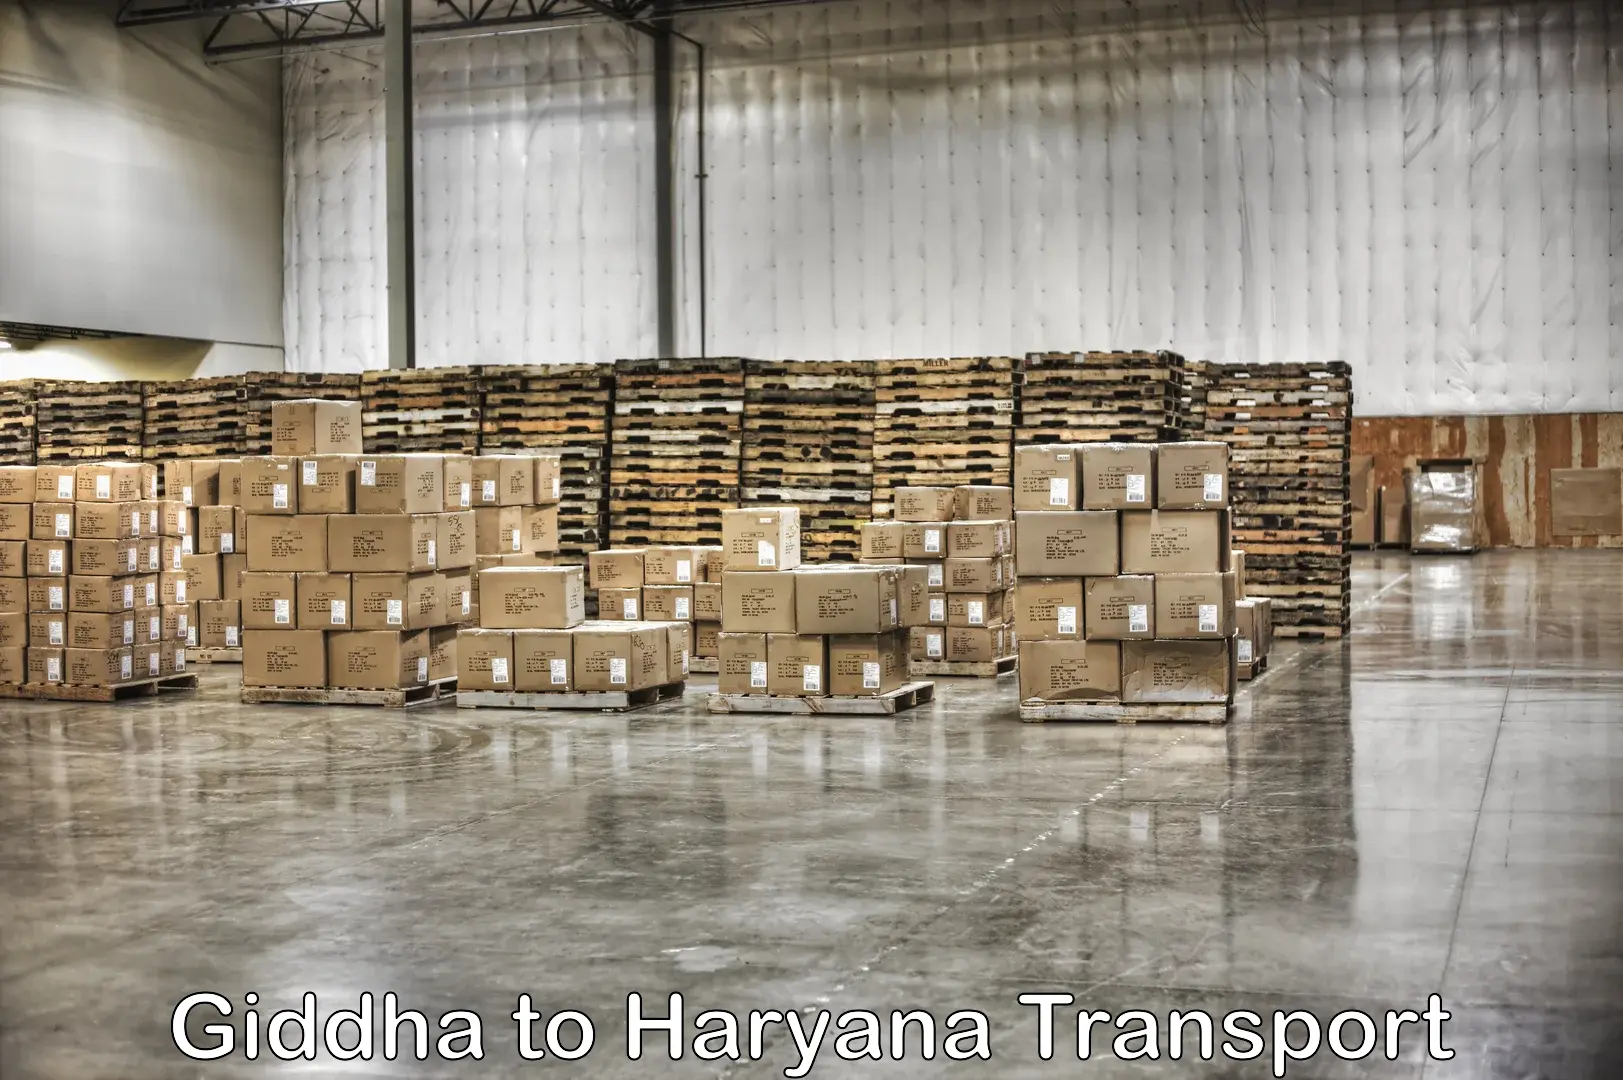 Express transport services in Giddha to Odhan